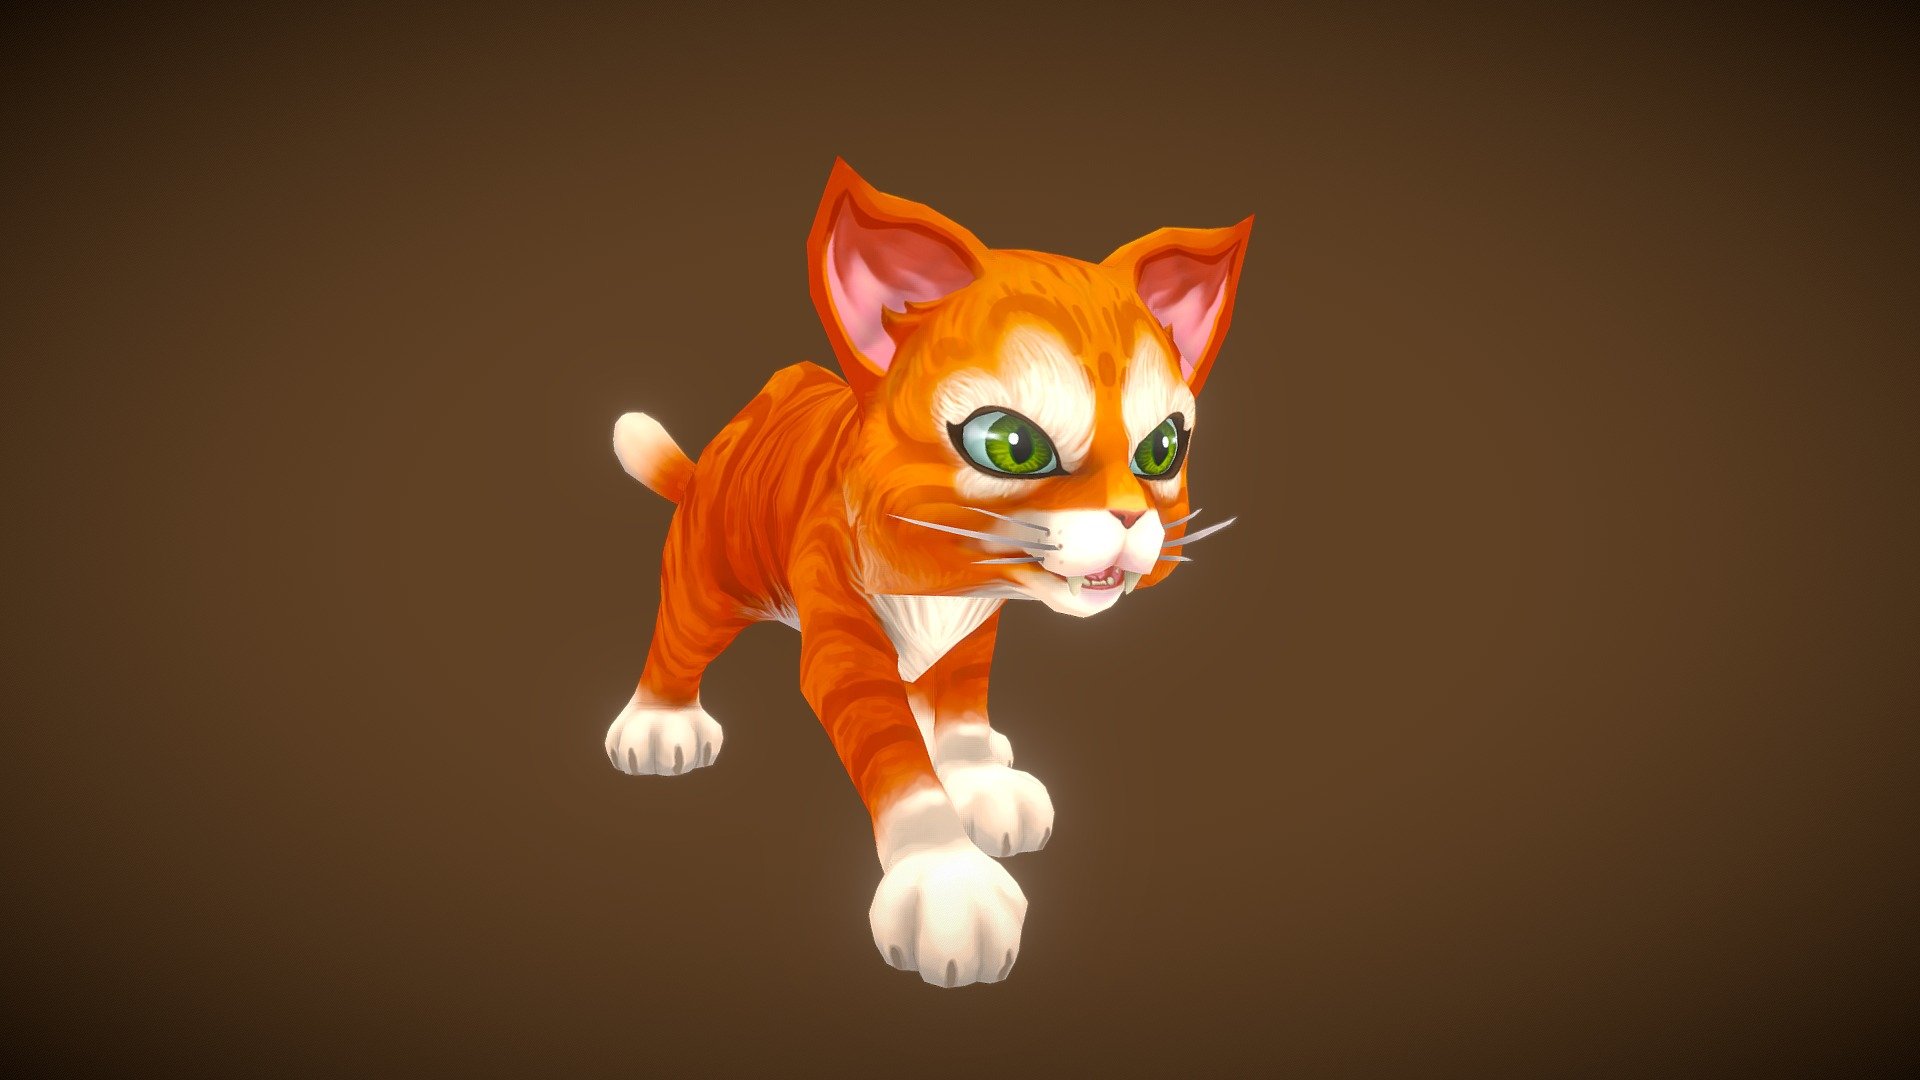 Stylized character for a project.

Software used: Zbrush, Autodesk Maya, Autodesk 3ds Max, Substance Painter - Stylized Fantasy Cat - 3D model by N-hance Studio (@Malice6731) 3d model